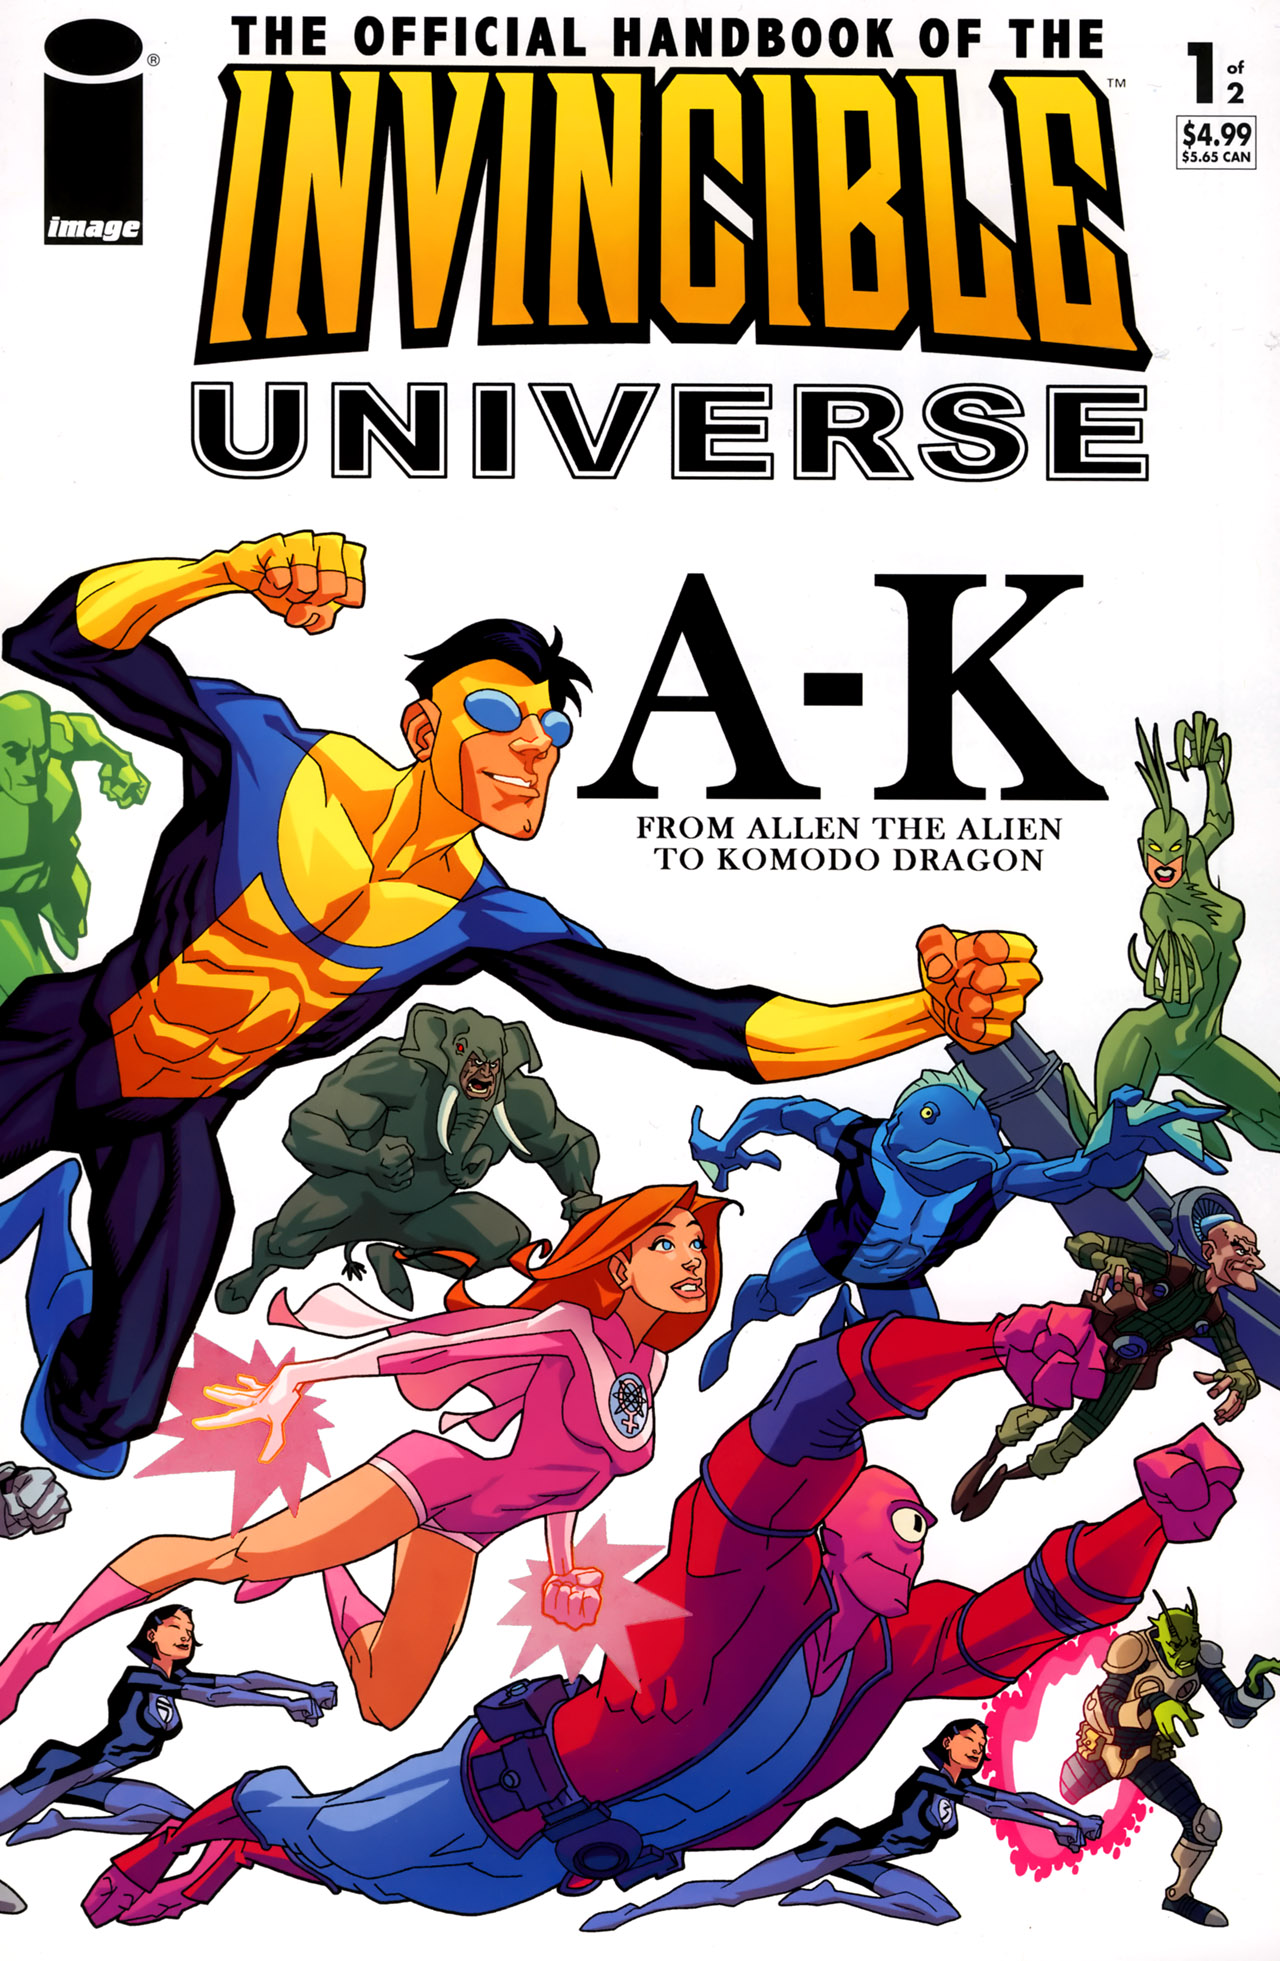 The Official Handbook of the Invincible Universe 1 Page 1